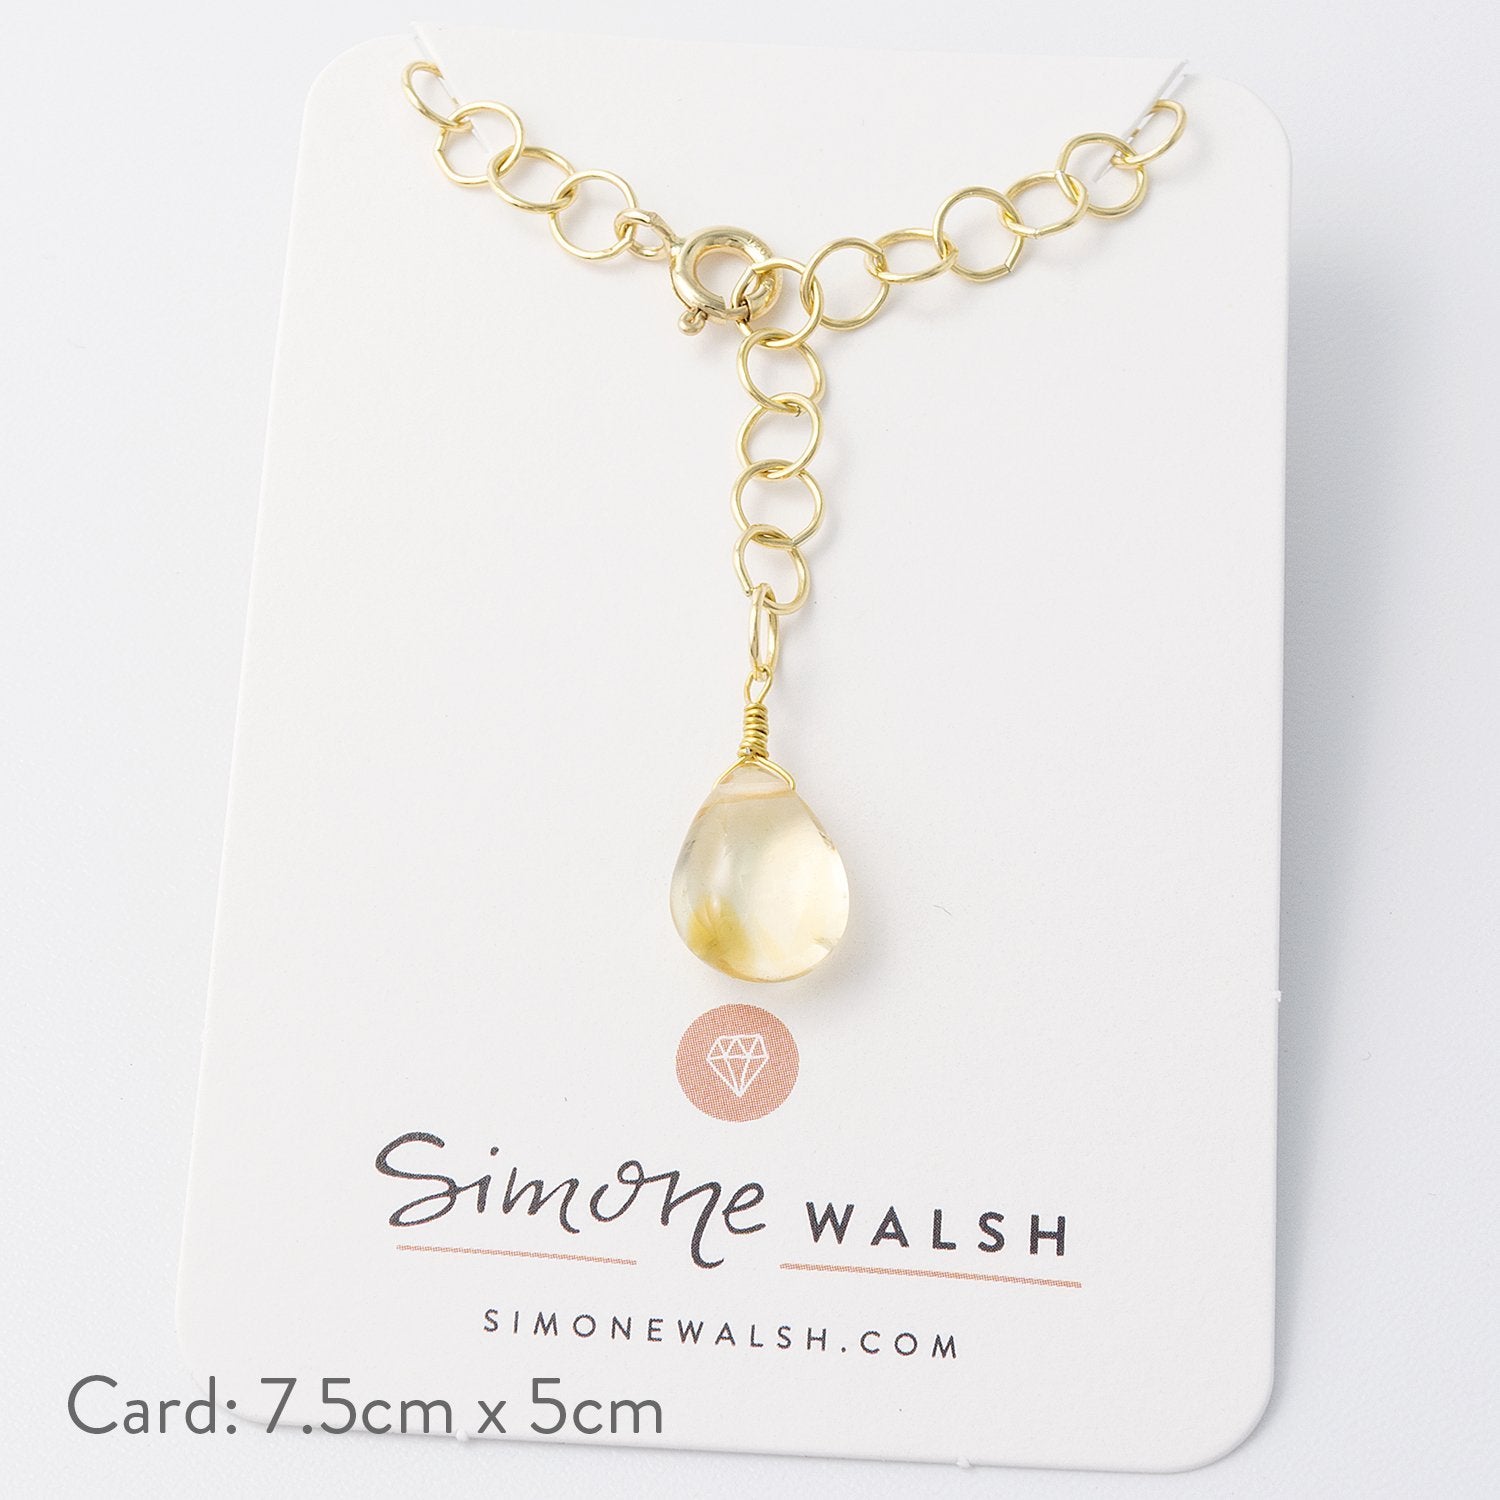 Gold chain necklace with citrine - Simone Walsh Jewellery Australia